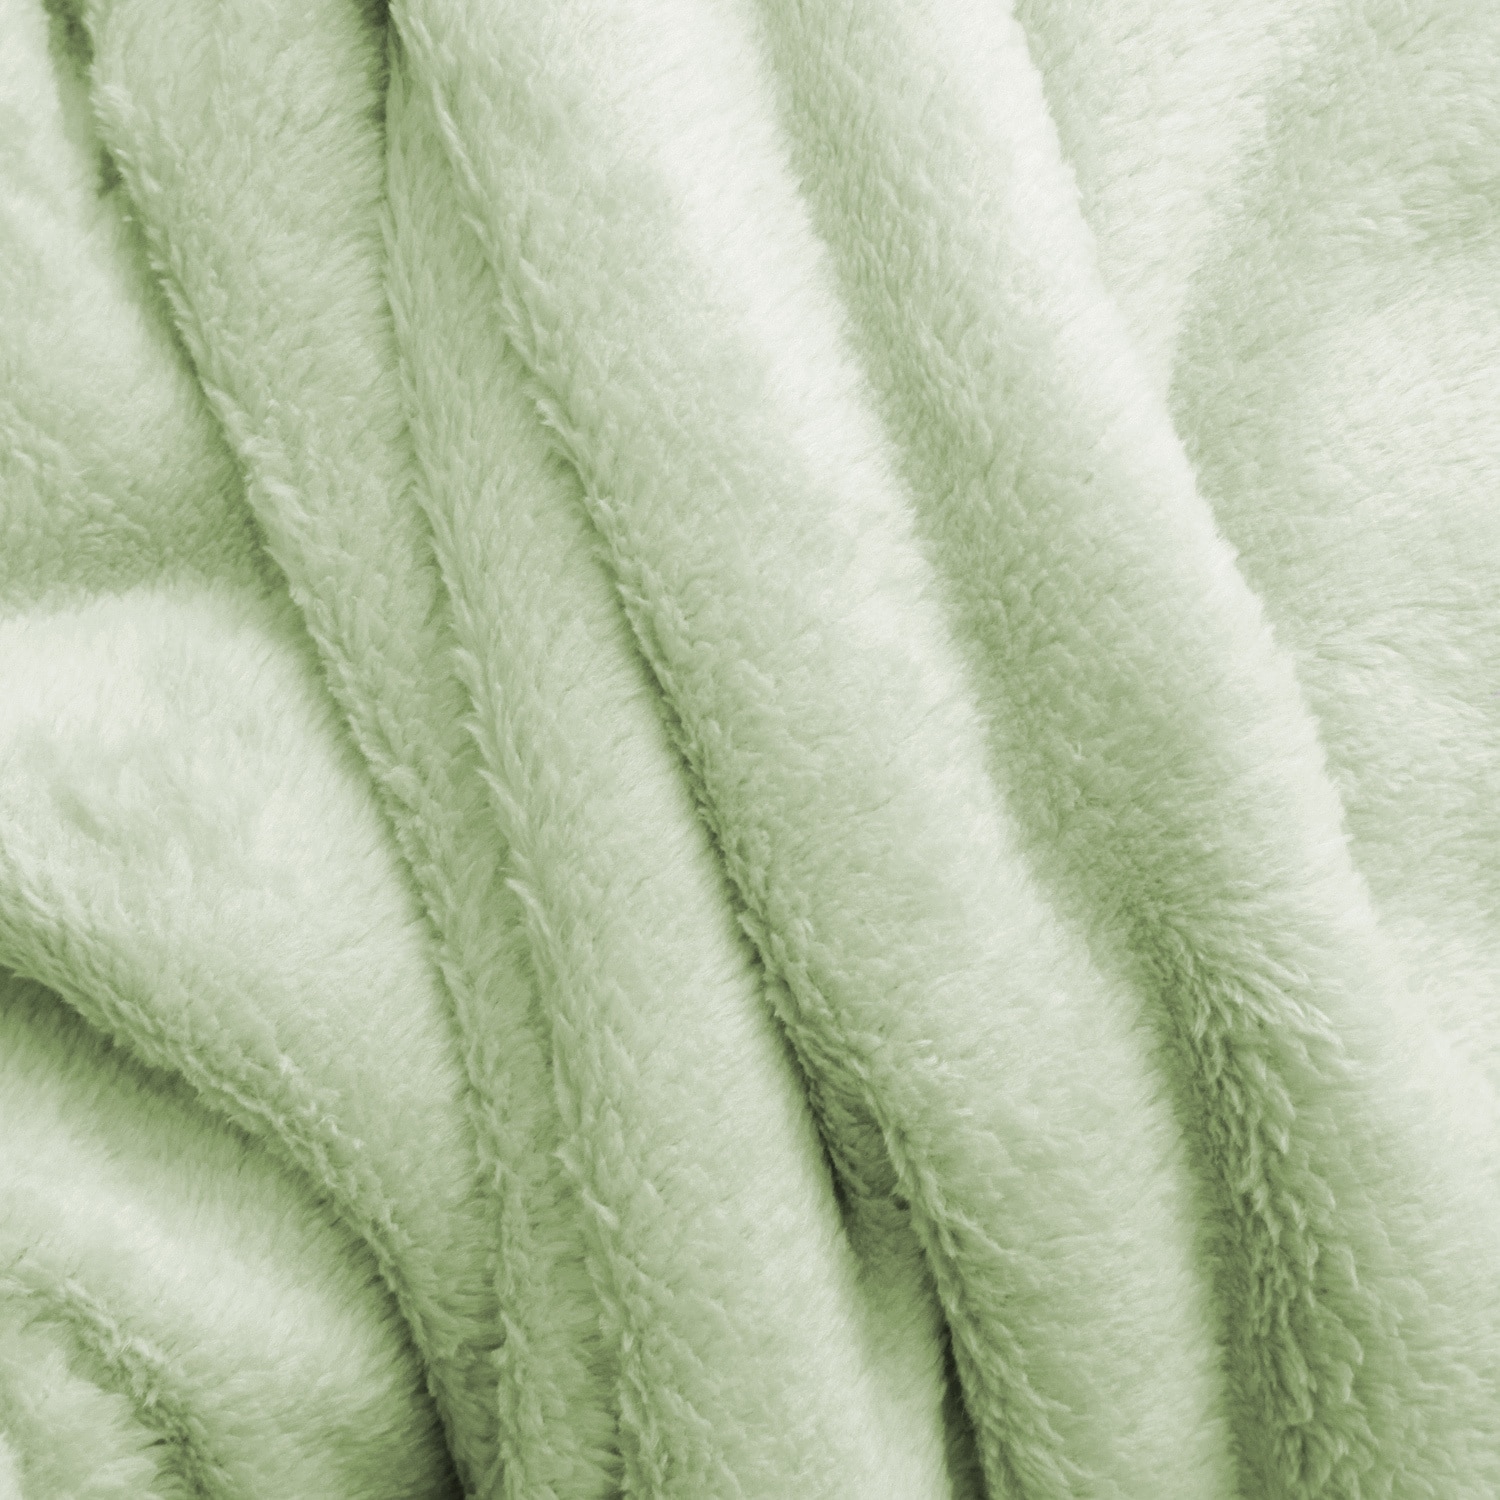 Elite Home Products All Seasons Solid Microplush Knit Hem Edging Blanket Green Size Twin